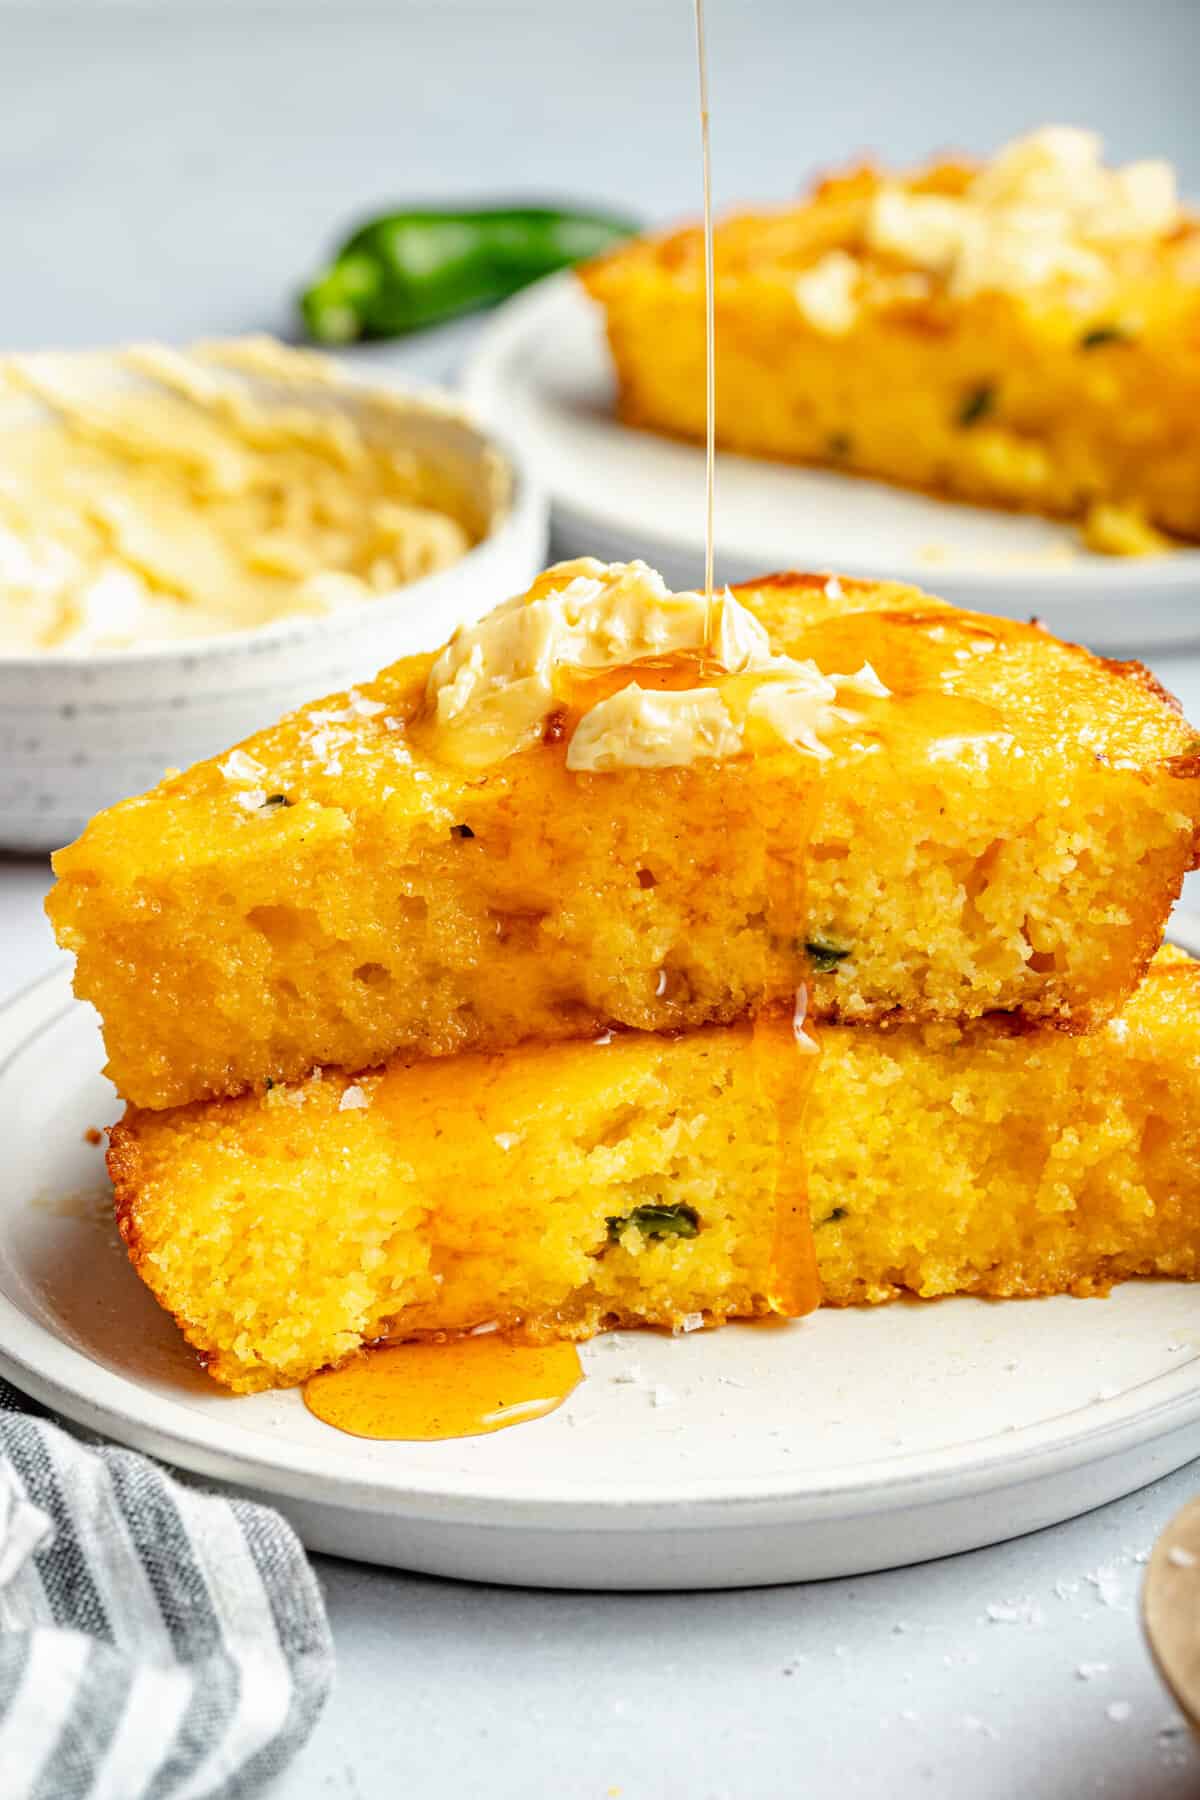 https://allthehealthythings.com/wp-content/uploads/2023/08/Jalapeno-Cheddar-Skillet-Cornbread-with-Whipped-Hot-Honey-Butter-6-scaled.jpg